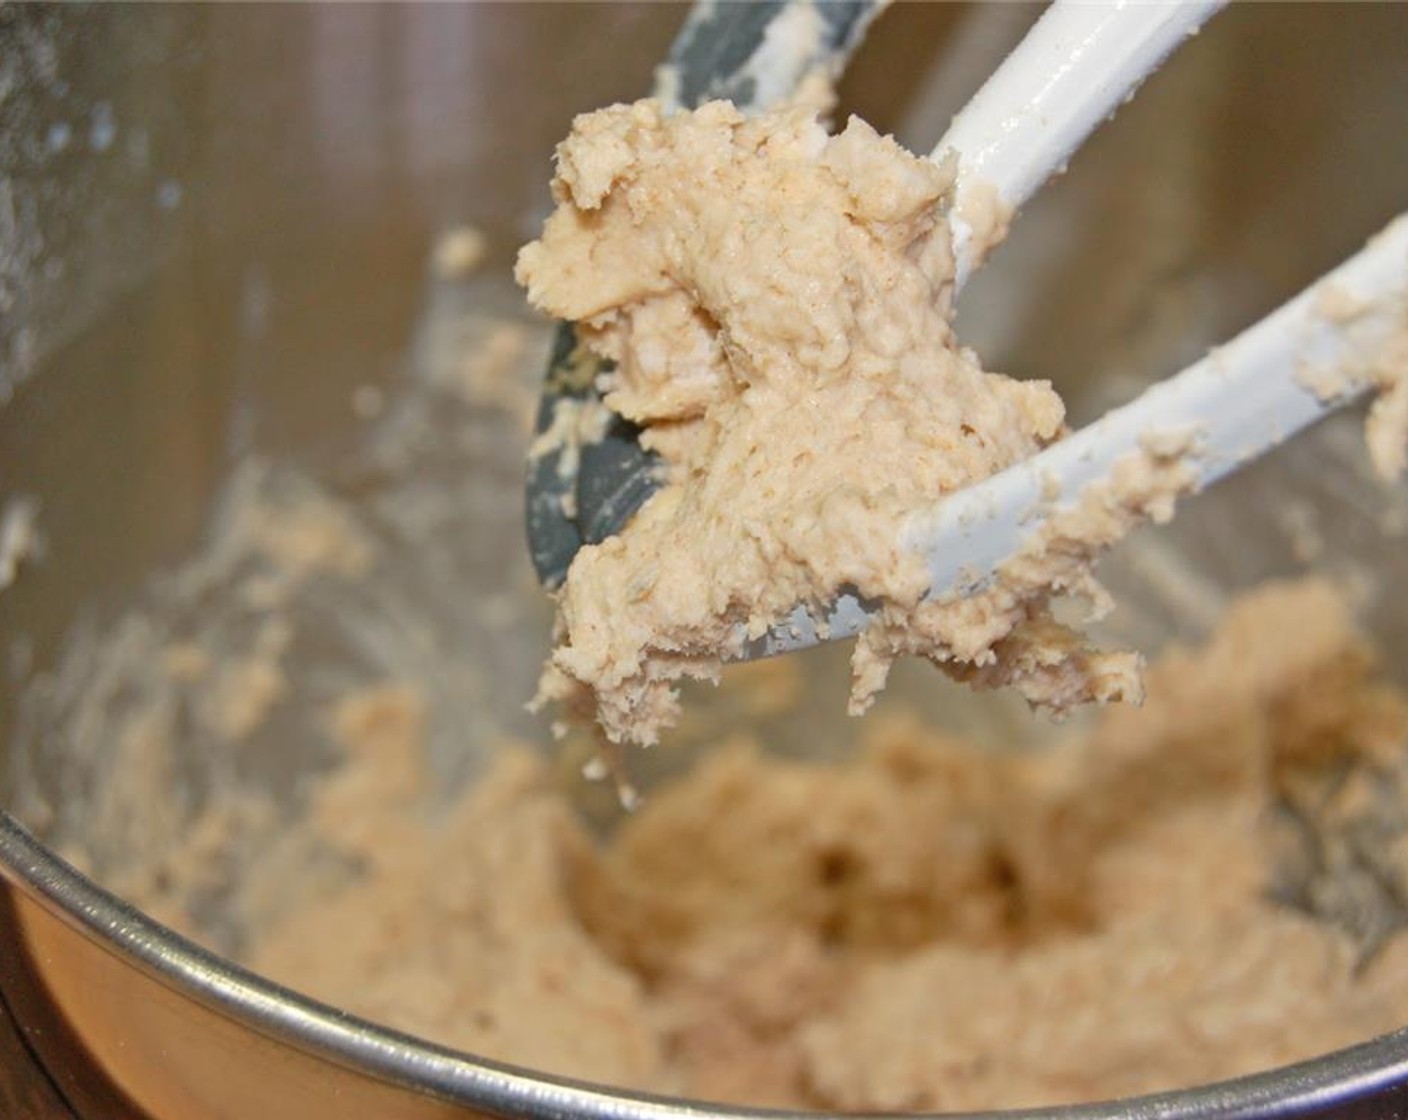 step 2 In a stand mixer combine All-Purpose Flour (2 cups), Milk (1 cup), Baking Powder (1 Tbsp), Vegetable Shortening (1/4 cup), Ground Cinnamon (1 tsp), and Salt (1 pinch). Mix on low until all incorporated and dough forms. Scrape sides of bowl as needed.